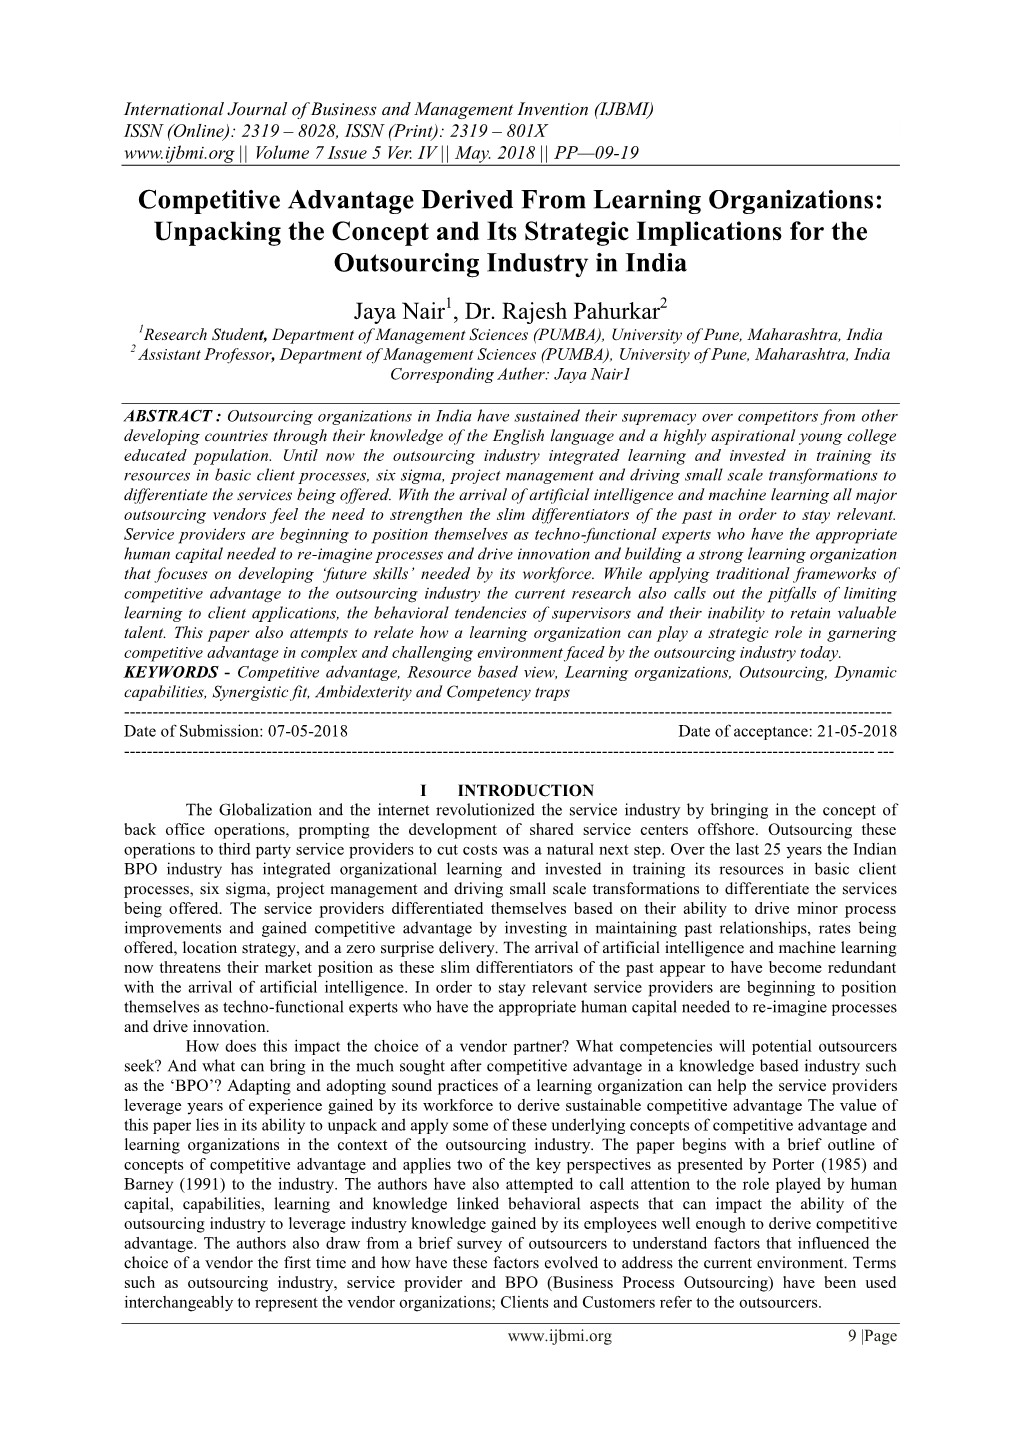 Competitive Advantage Derived from Learning Organizations: Unpacking the Concept and Its Strategic Implications for the Outsourcing Industry in India